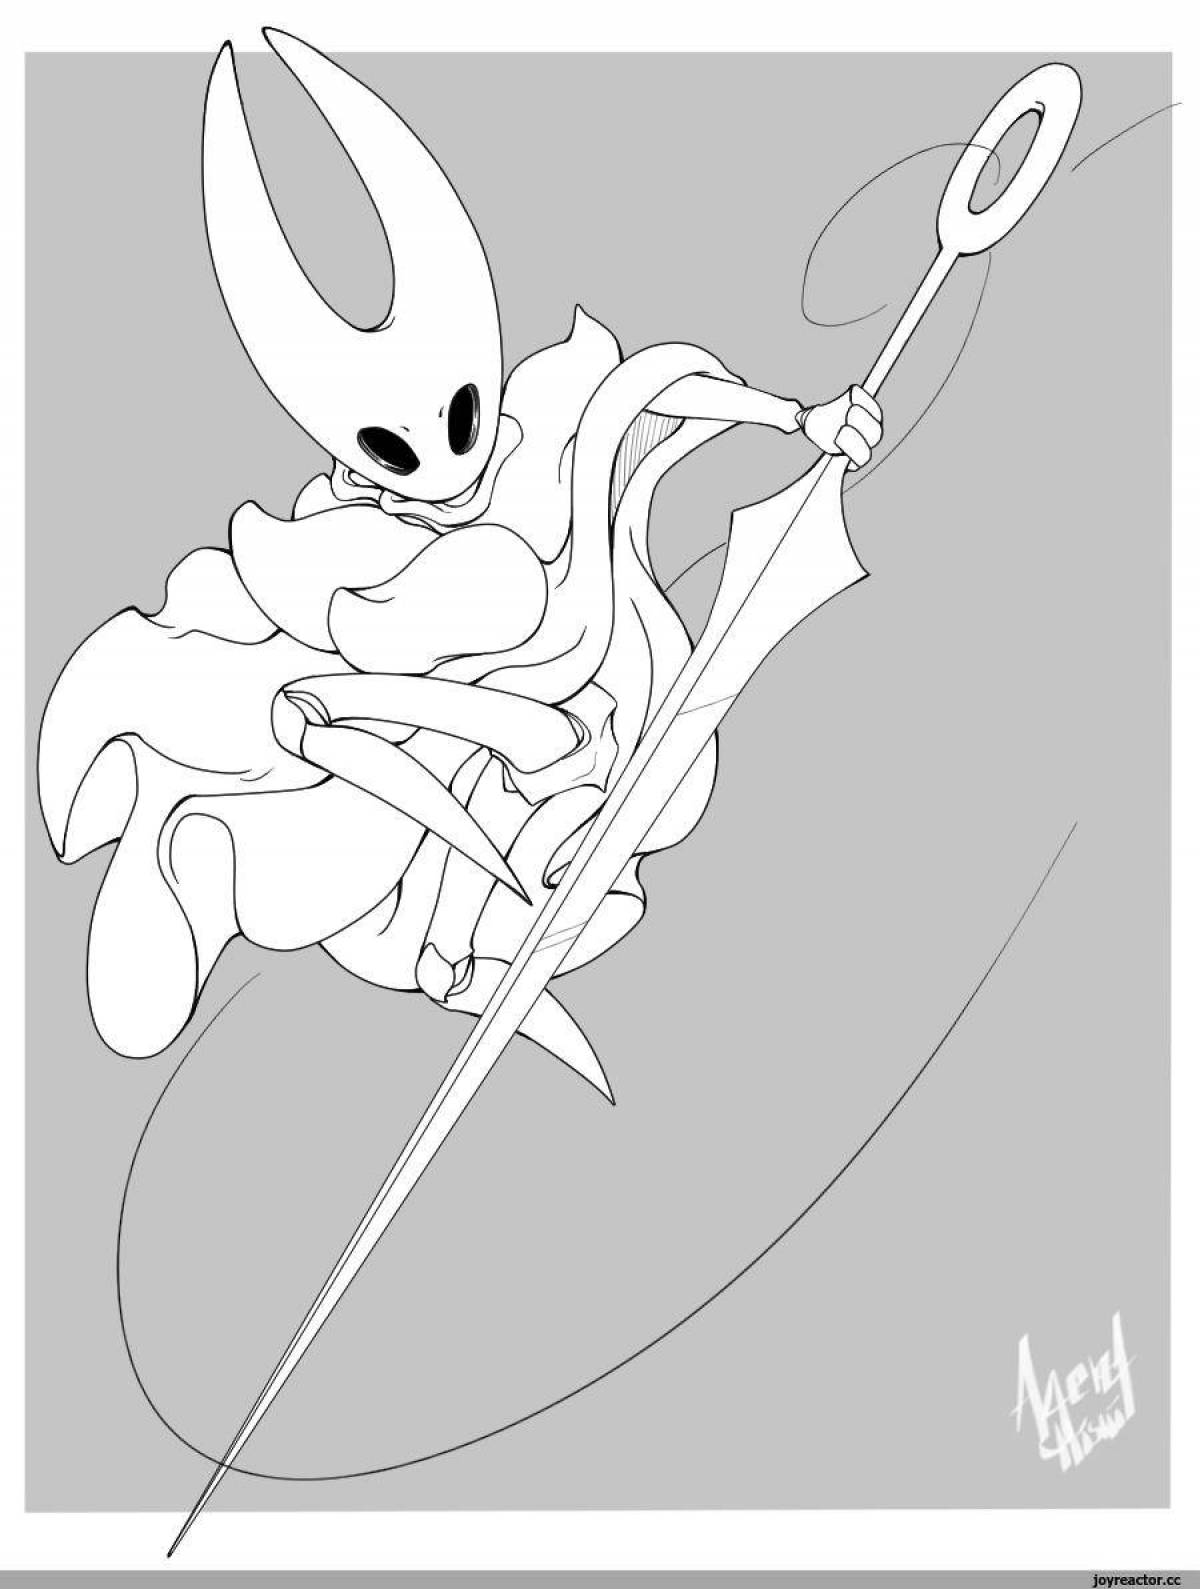 Delightful coloring of the hollow knight